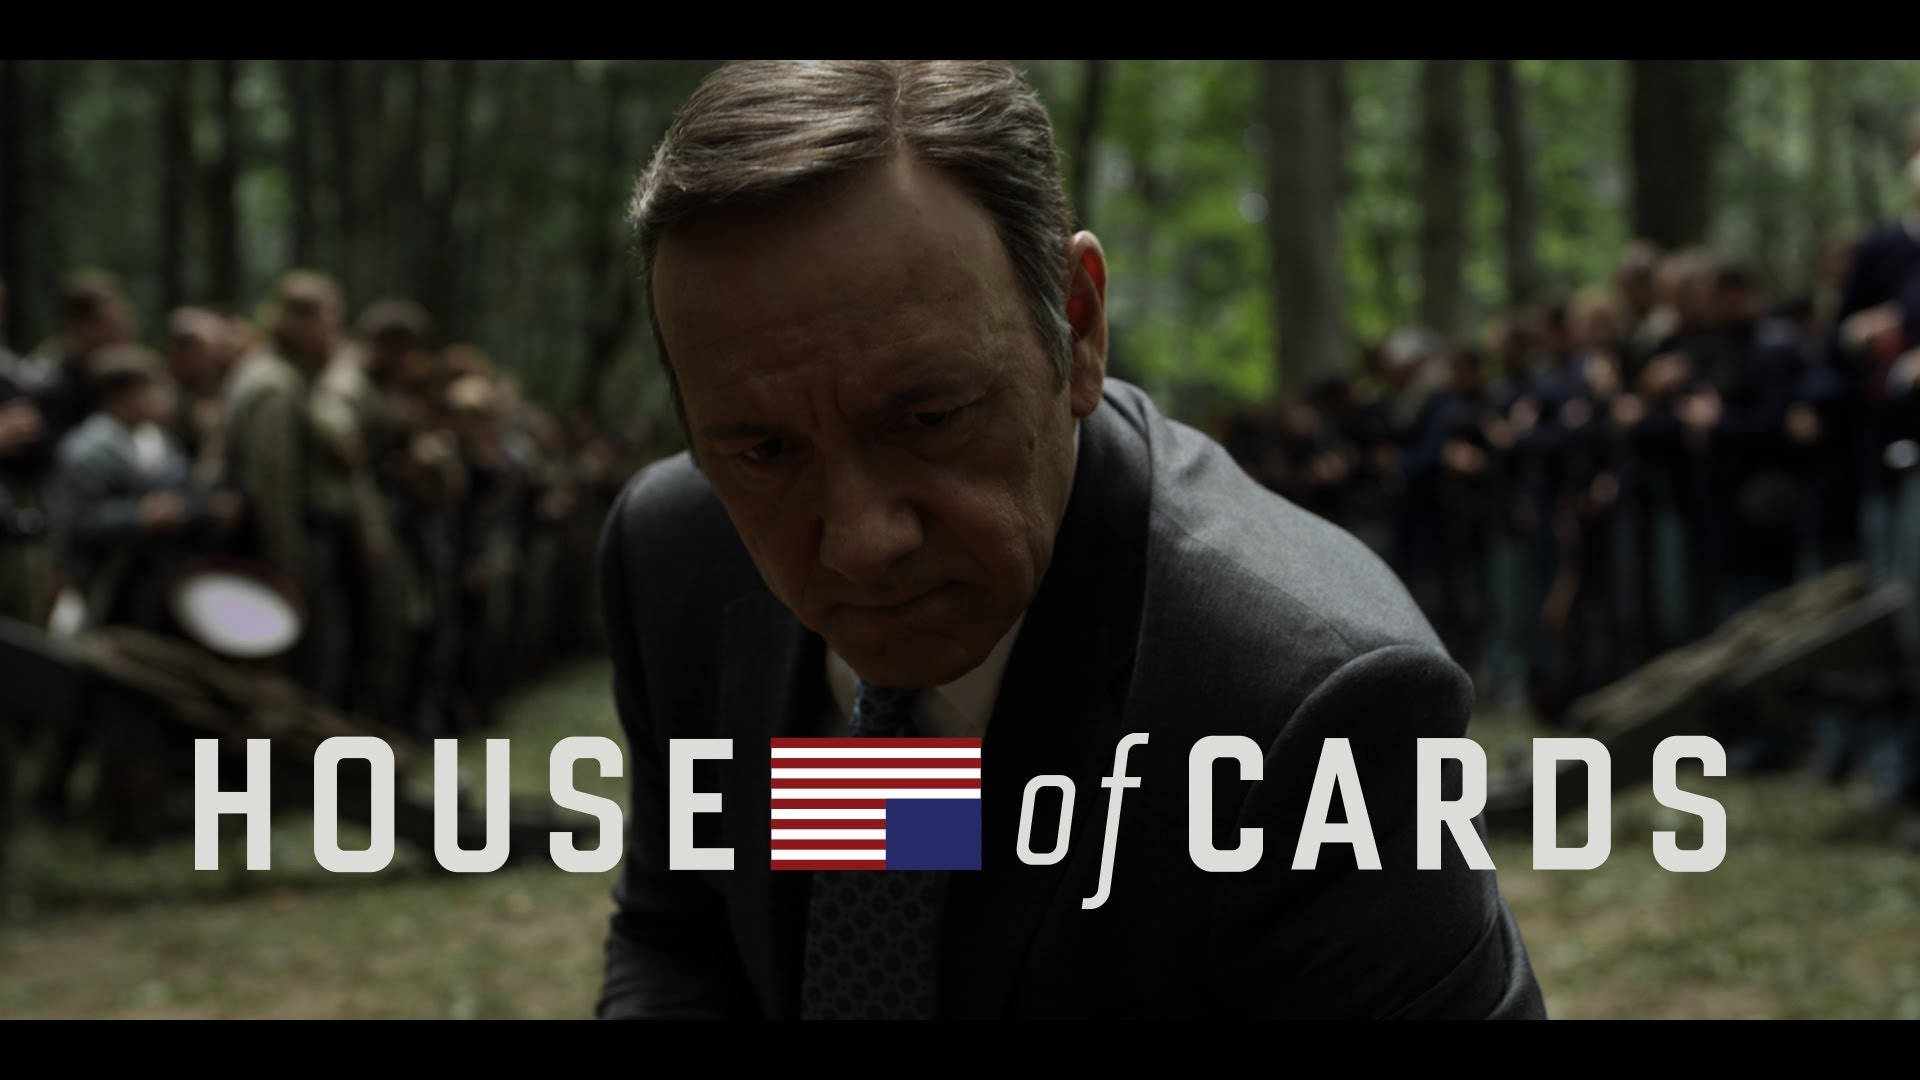 Kevinspacey House Of Cards - Kevin Spacey En House Of Cards Fondo de pantalla